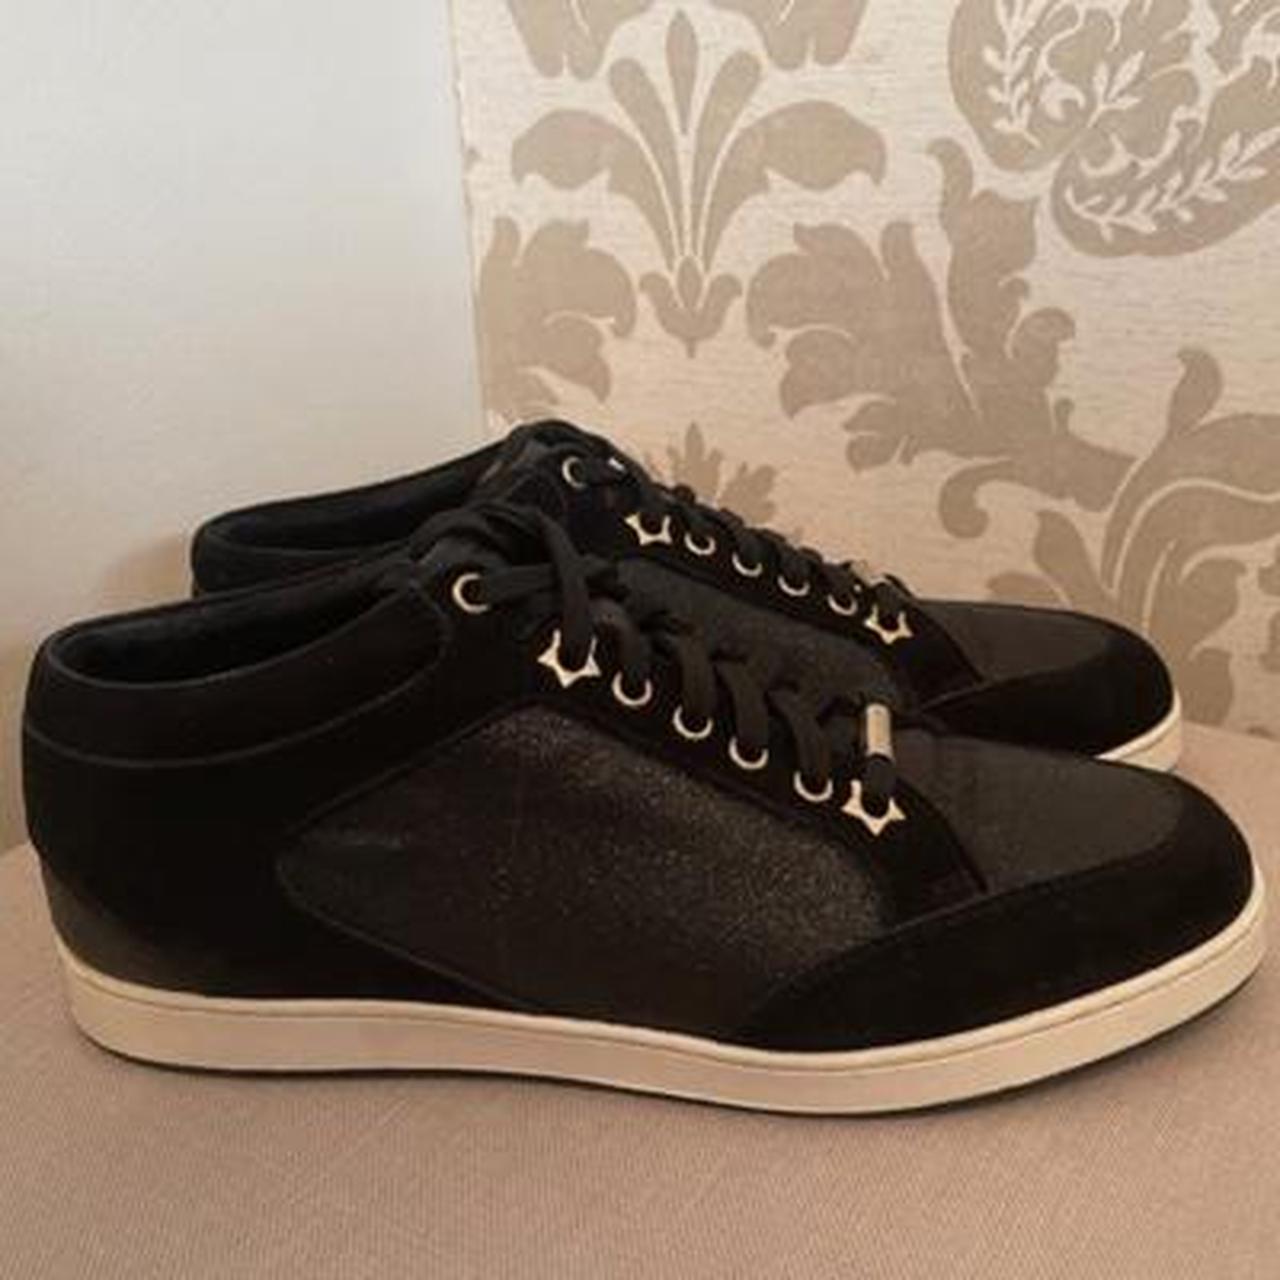 Jimmy choo Morton cut out sneaker trainer. They are - Depop